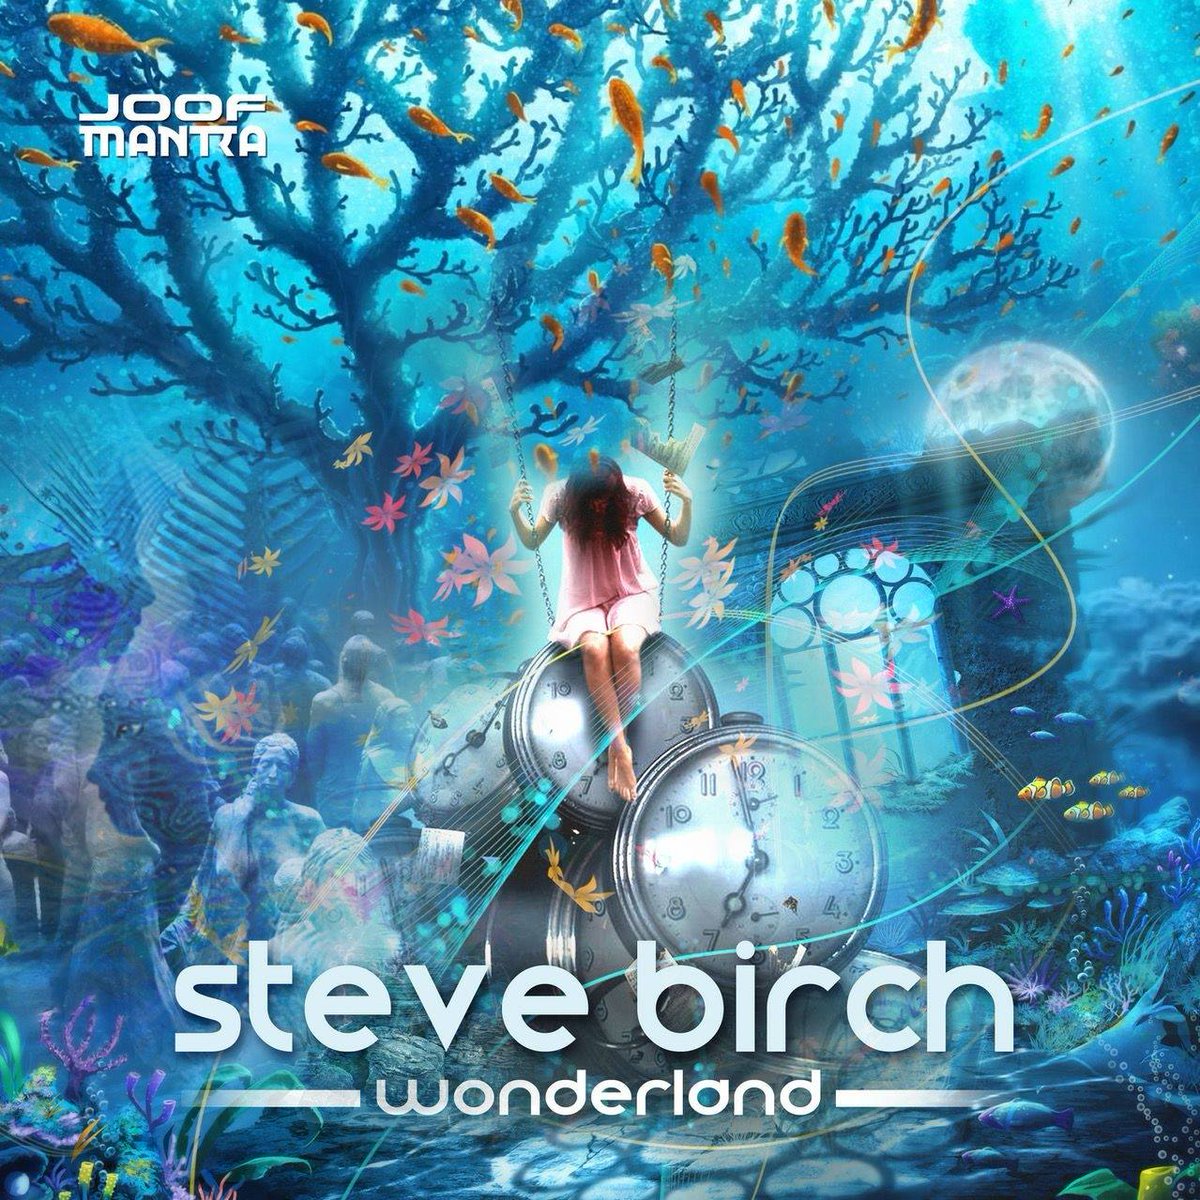 We can't wait for @DjStevebirch's new album in a couple of weeks on JOOF mantra.